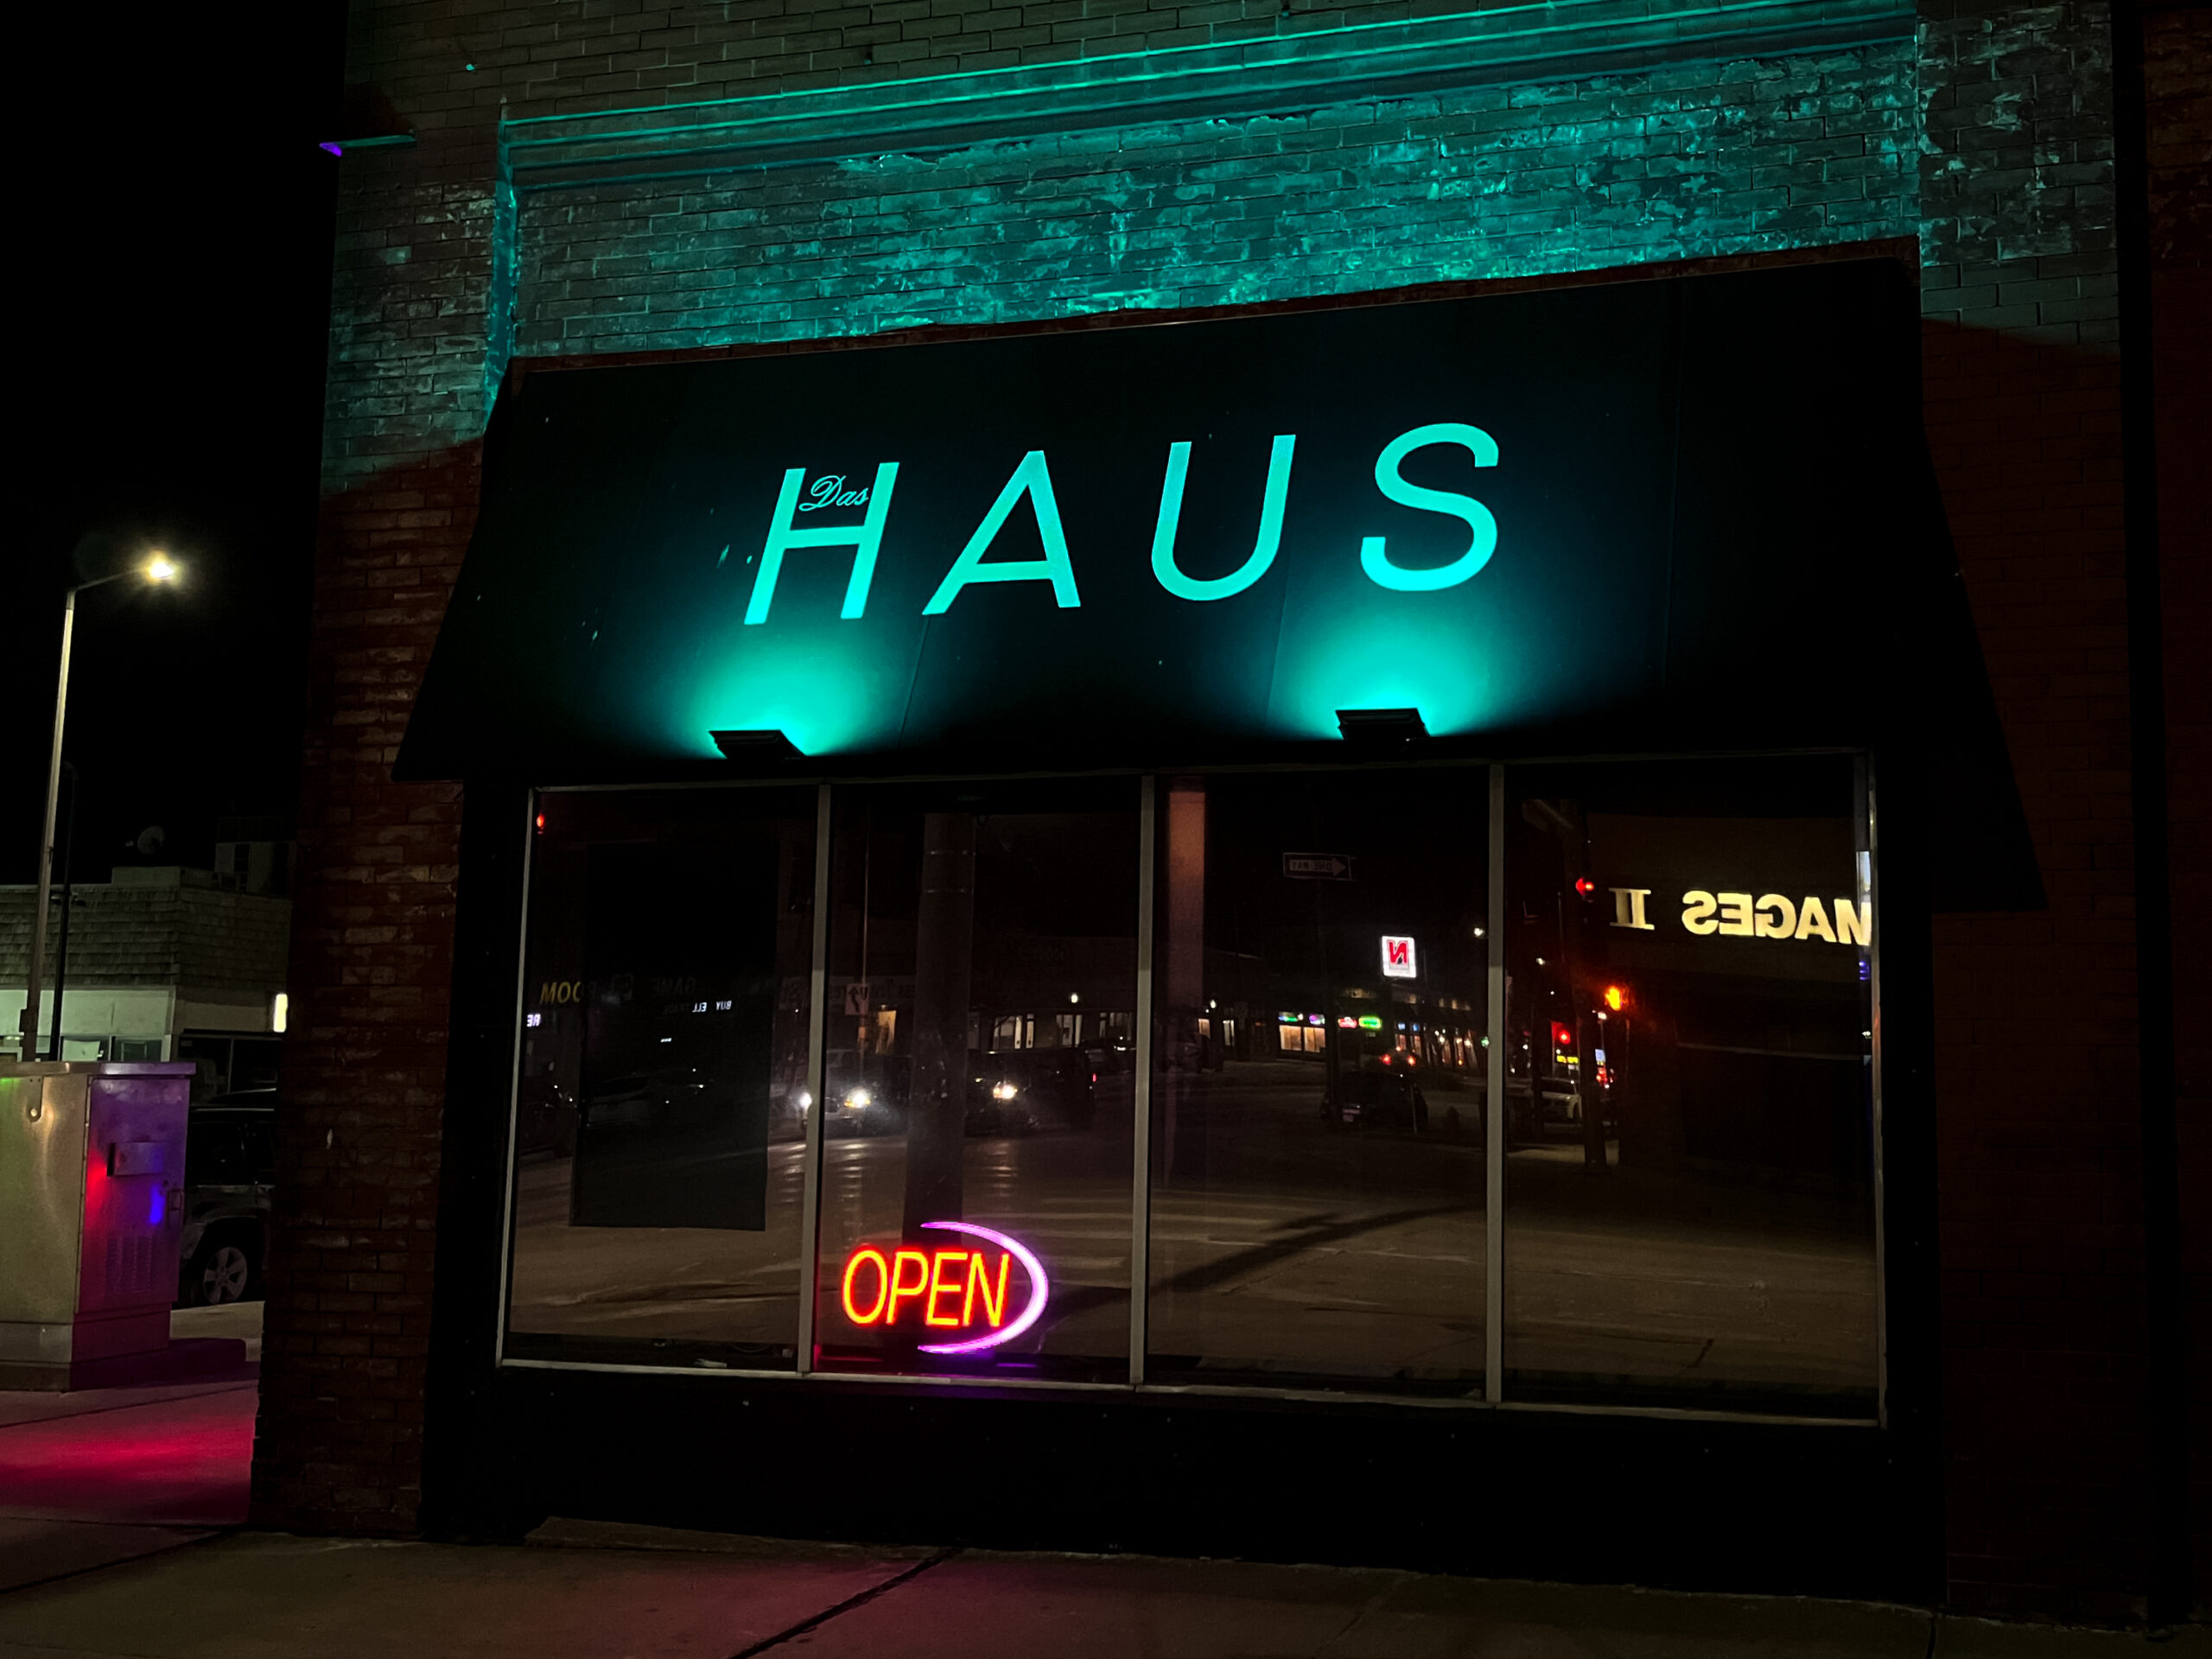 Das Haus bar from the outside, with an open sign in the window and a teal glow shining on the Das Haus logo.